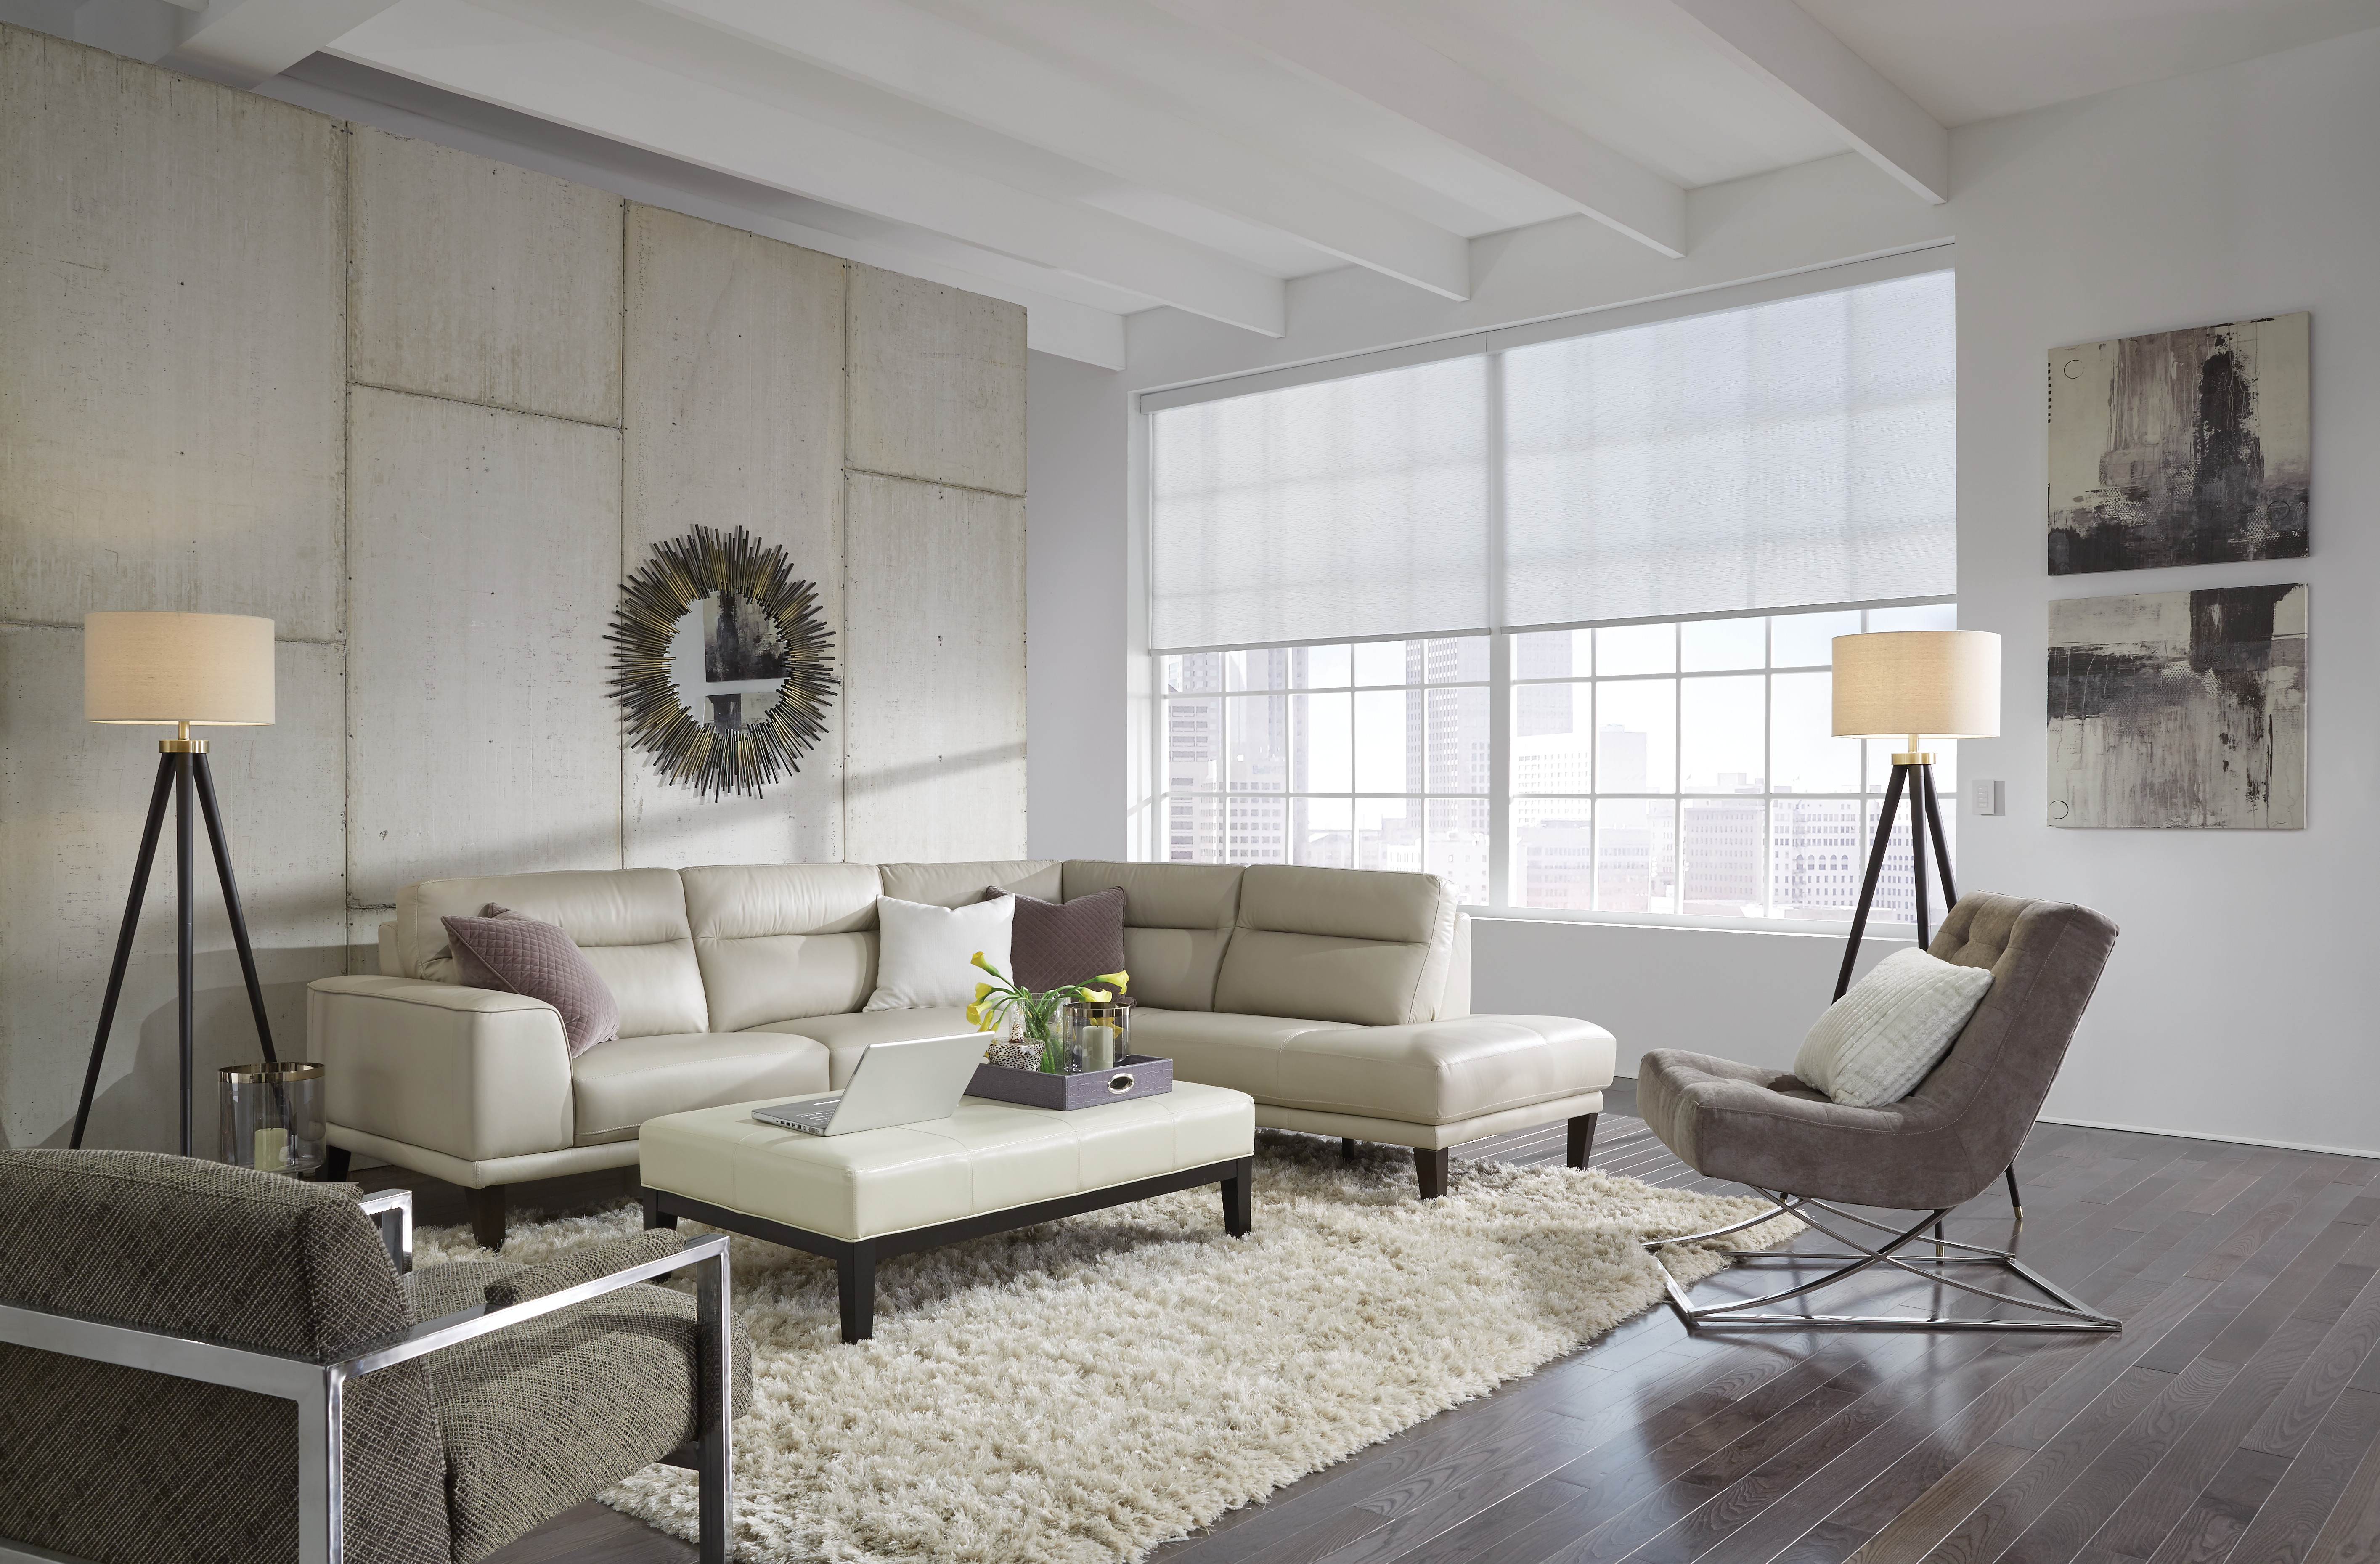 Enhancing Aesthetics and Ease with Motorized Window Treatments